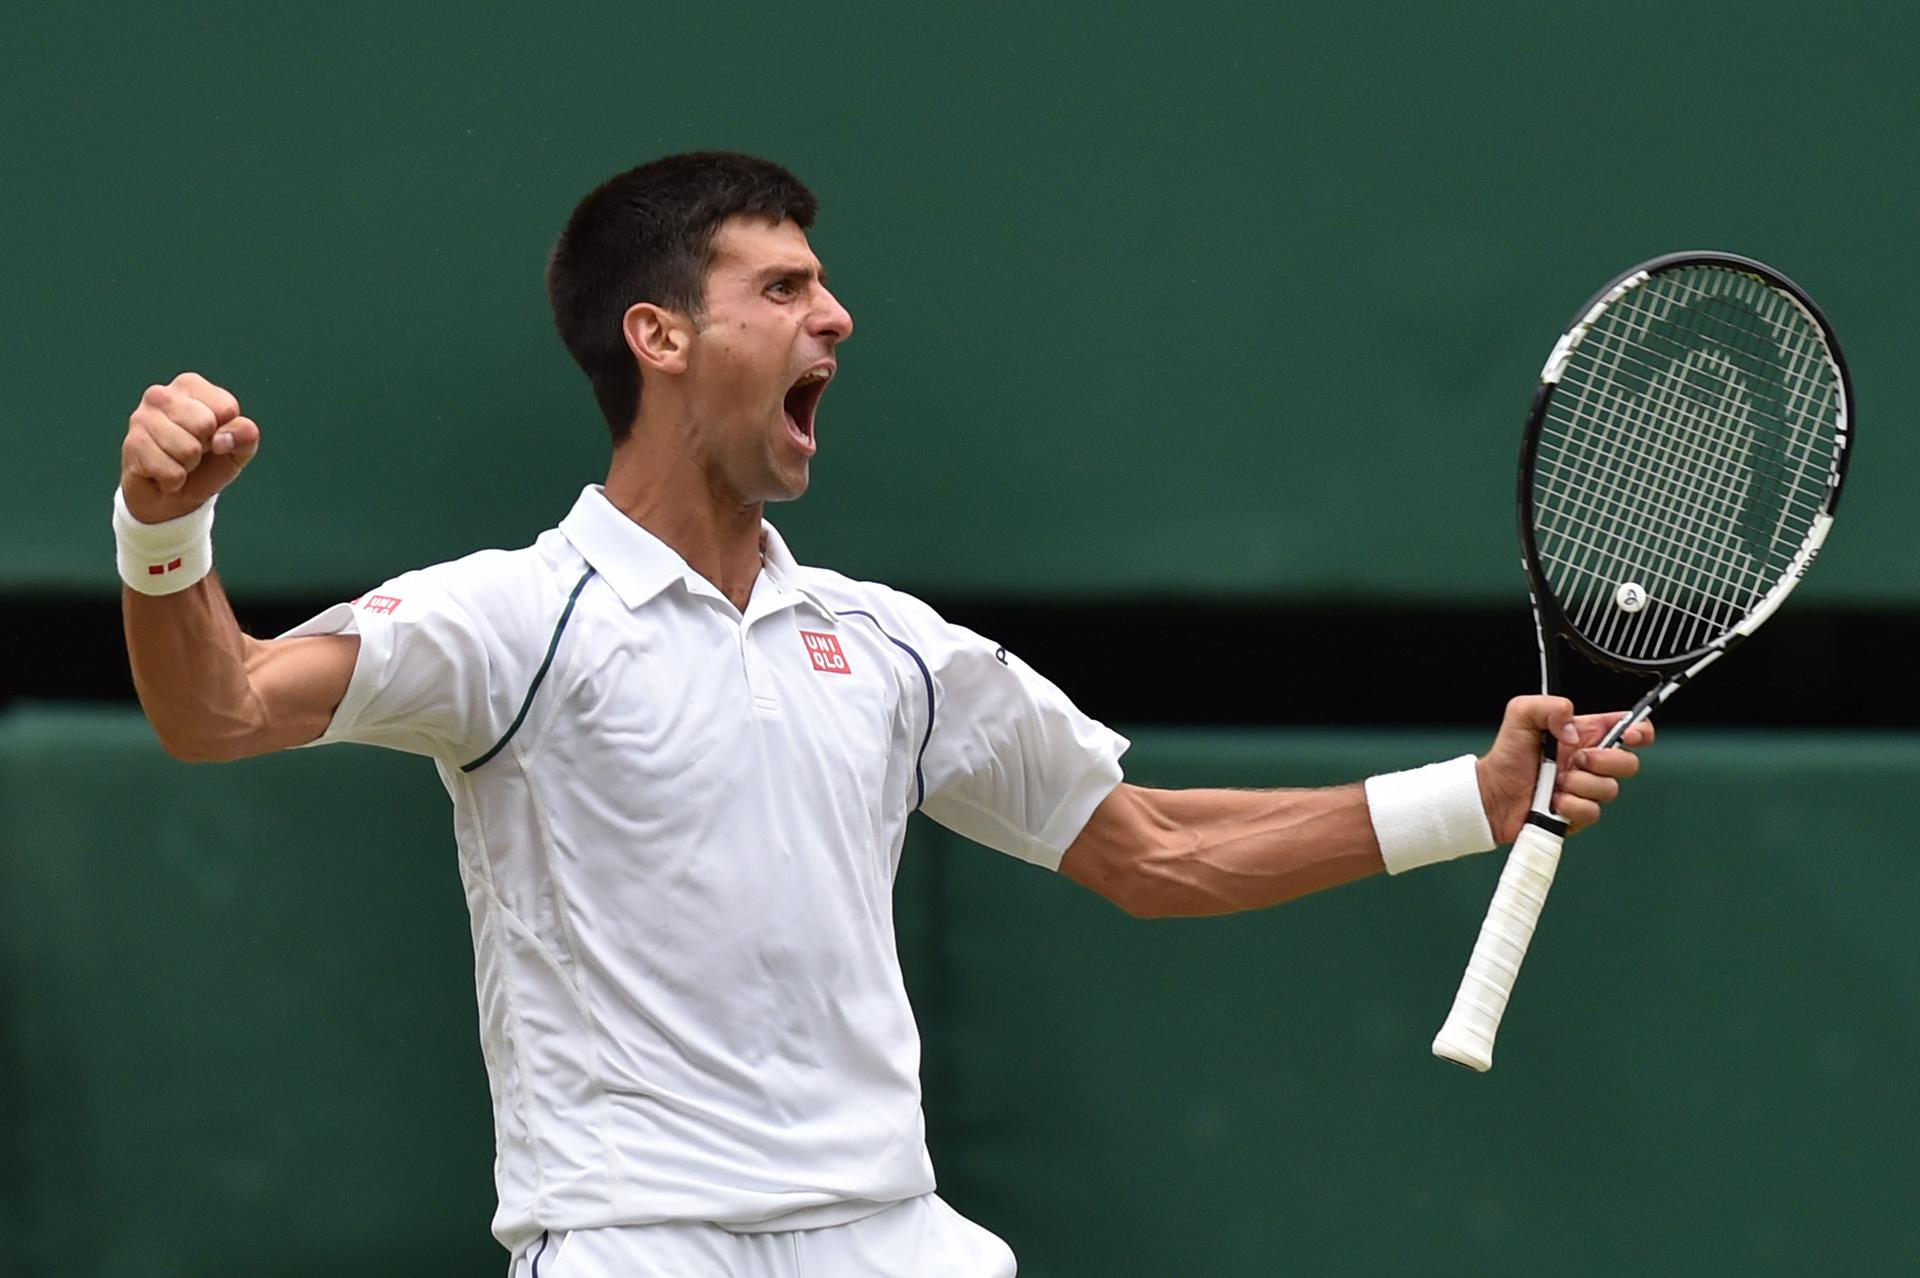 Serbia's Novak Djokovic lets out a celebratory yell after beating Roger Federer in the Wimbledon men's singles final for his third All England Club championship. Photo: AFP